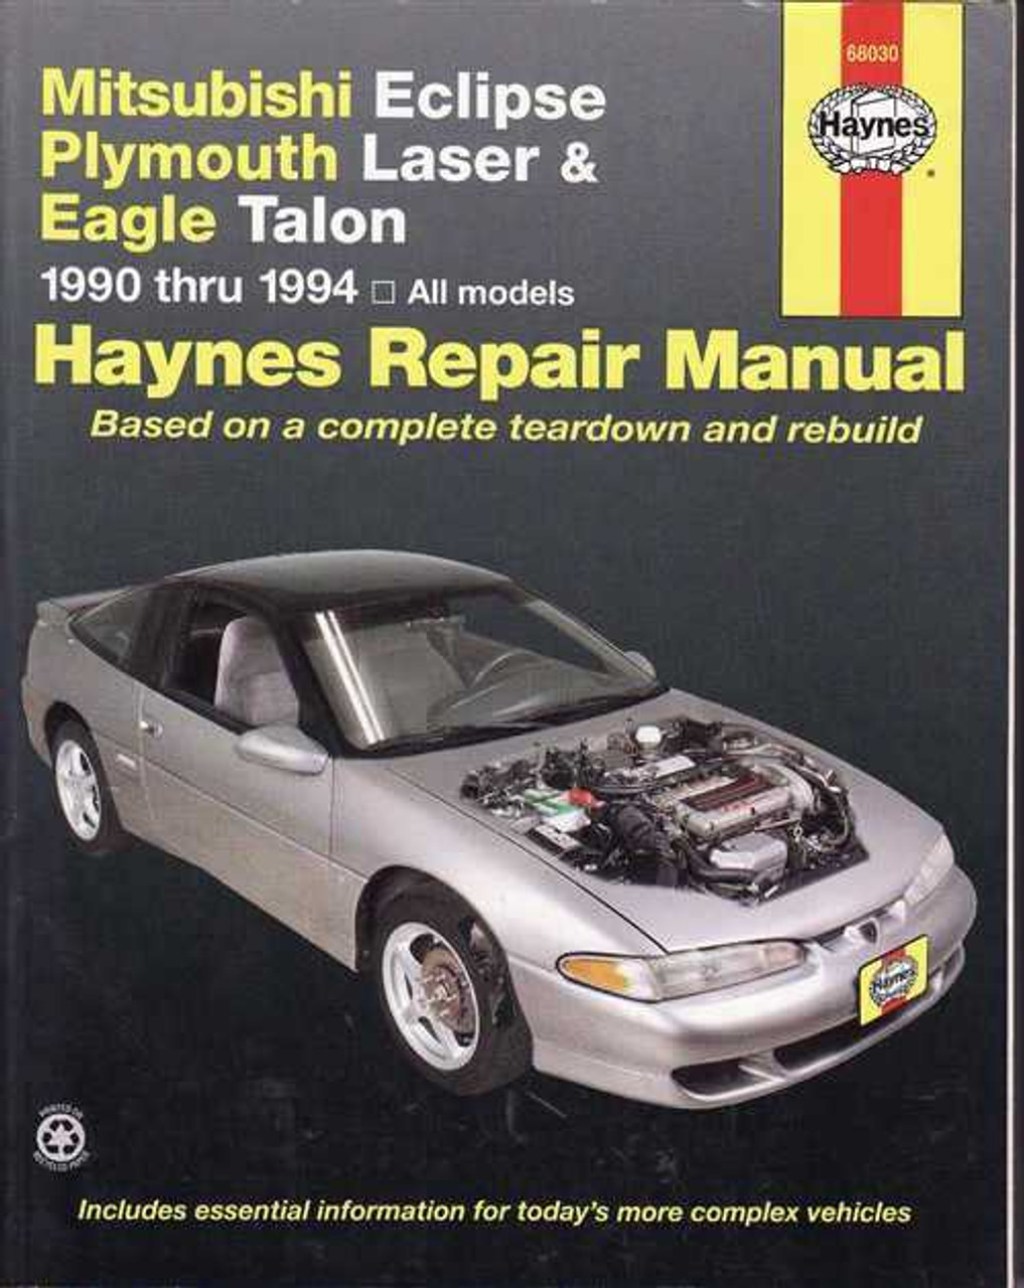 Picture of: Mitsubishi Eclipse, Plymouth Laser, Eagle Talon  –  Workshop Manual